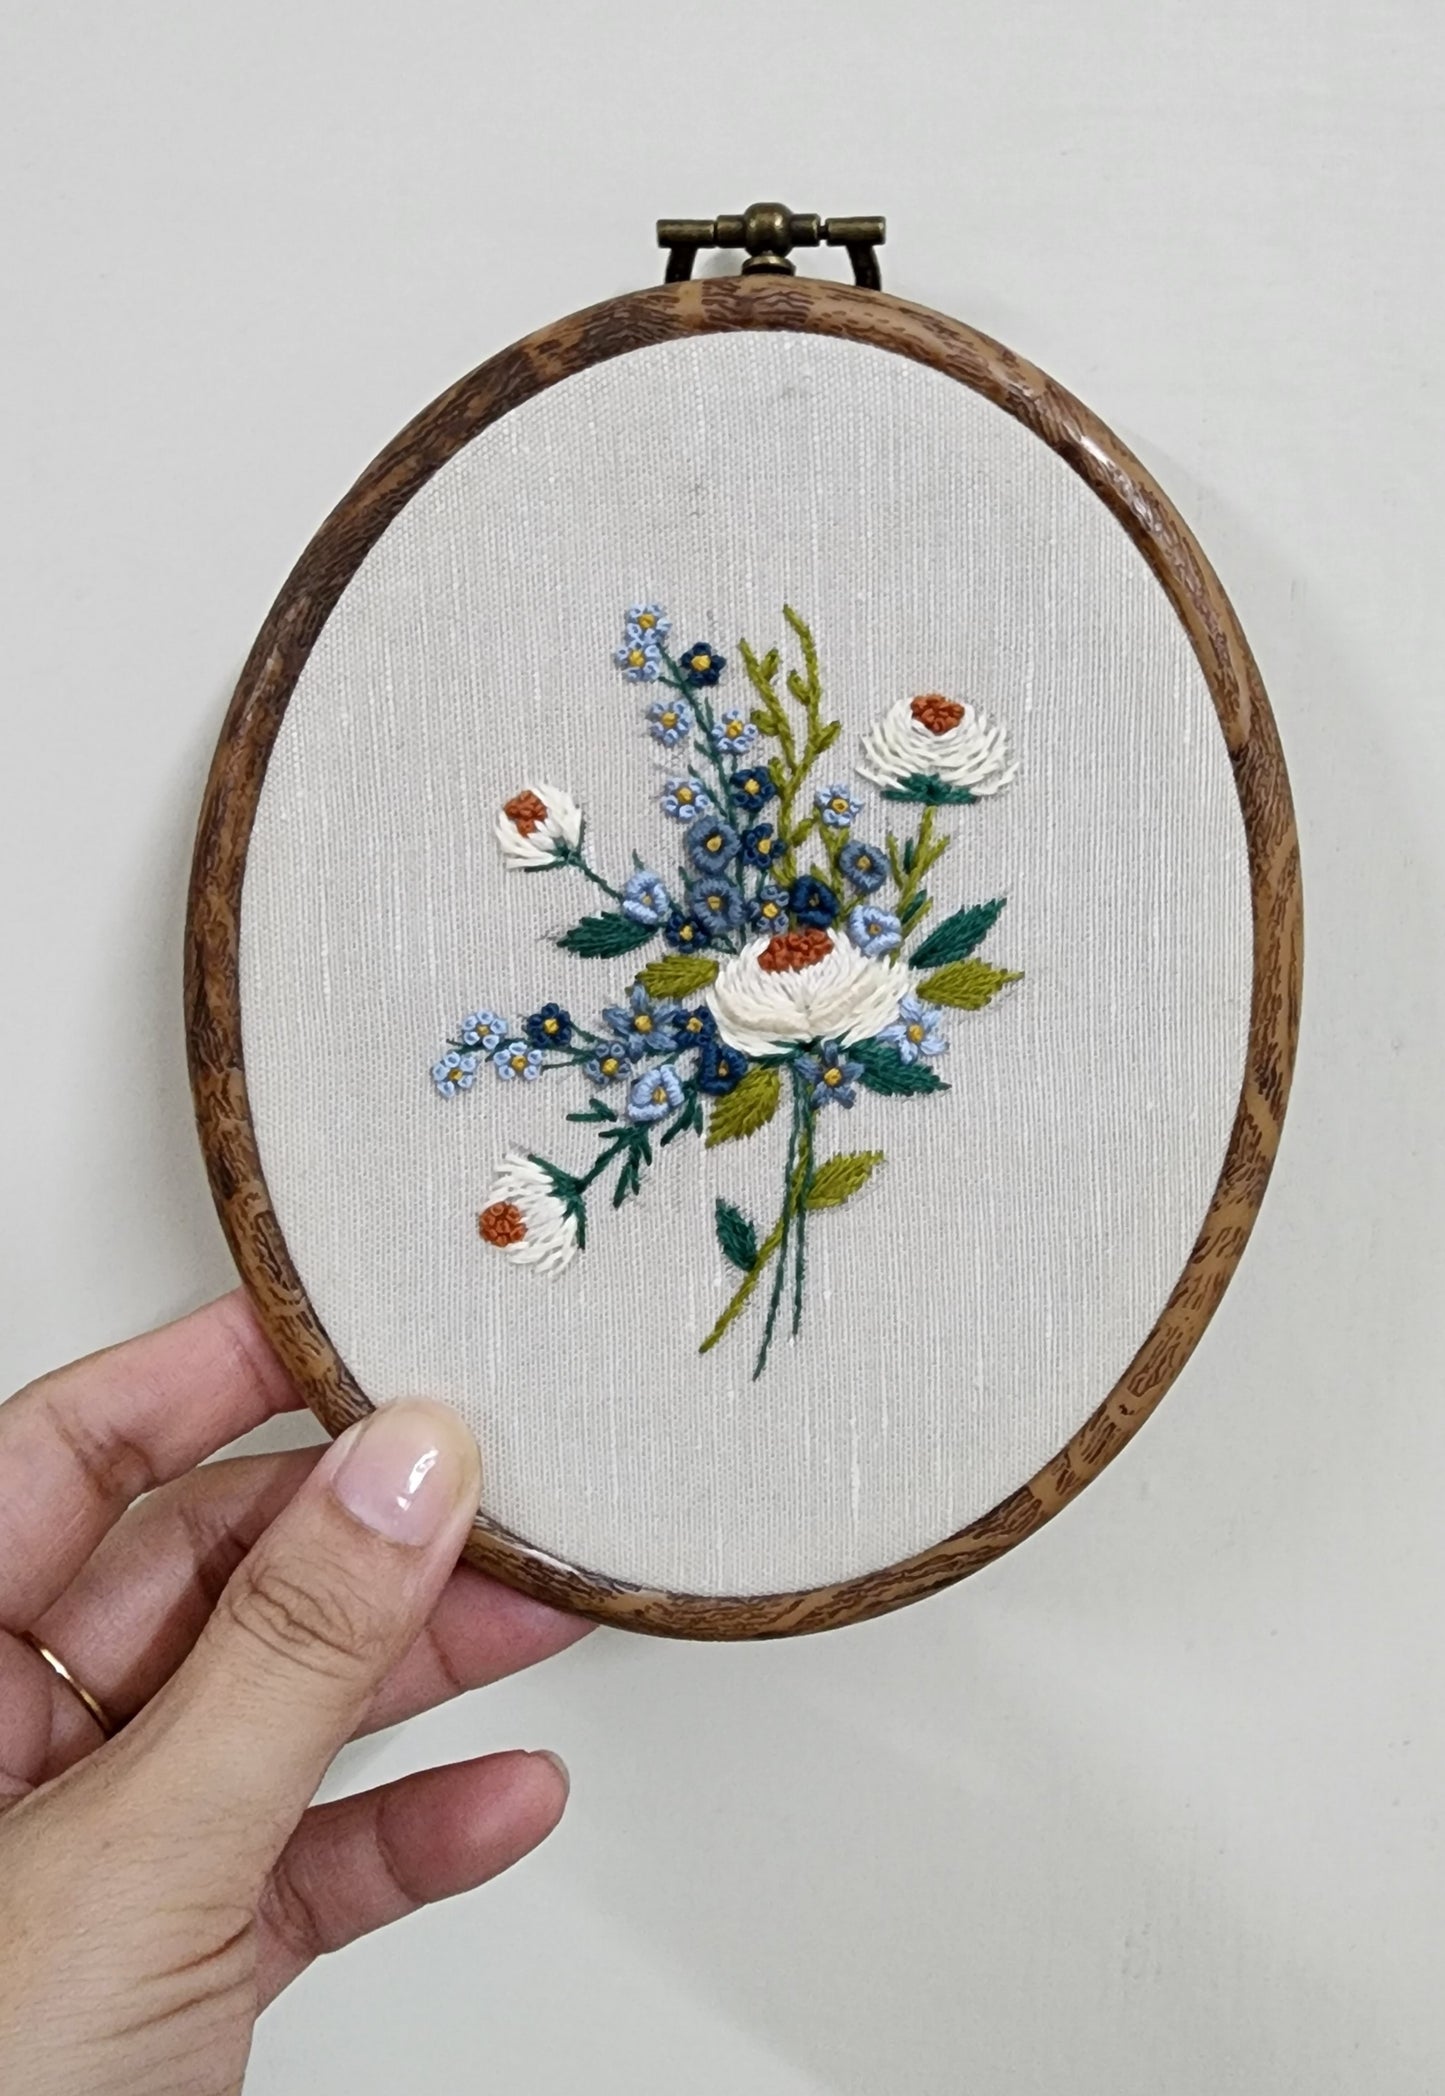 Ikali - Bouquet - Hand-embroidered Wall-hanging Hoop